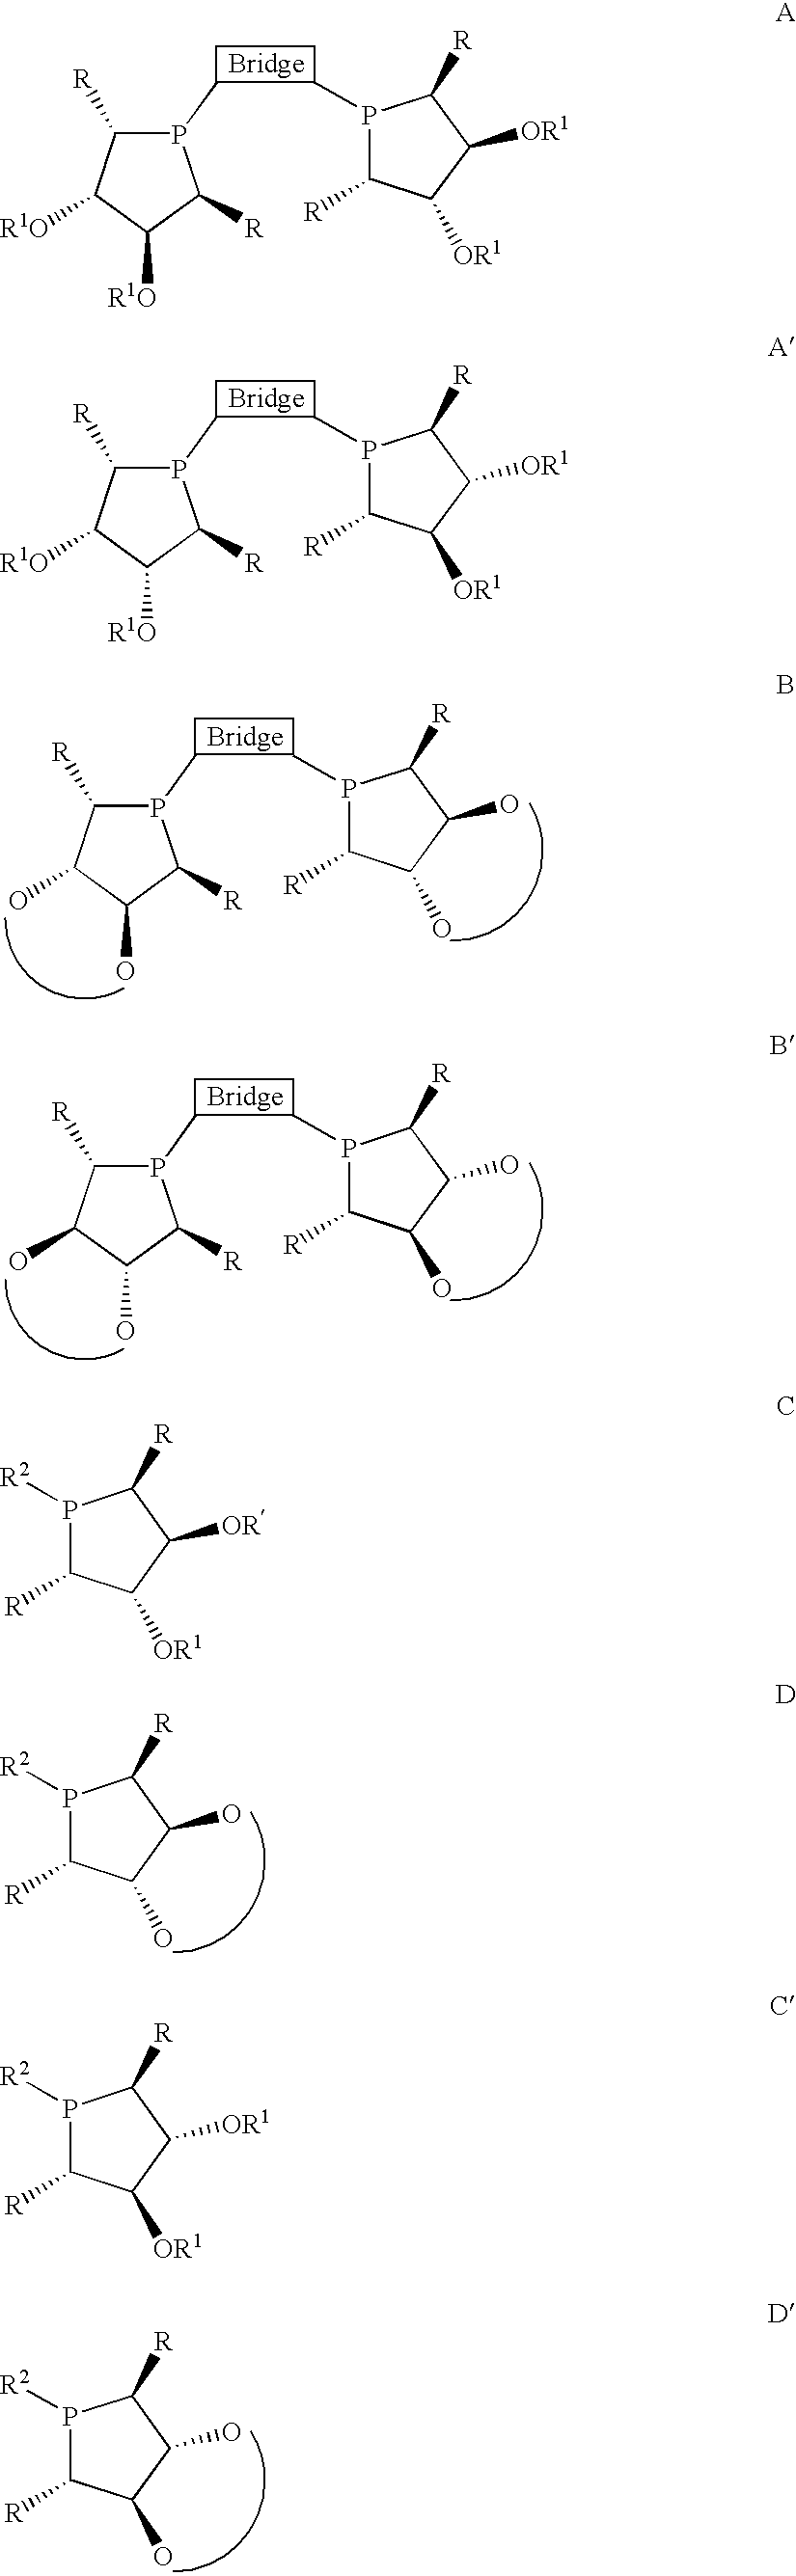 Asymmetric catalysis based on chiral phospholanes and hydroxyl phospholanes